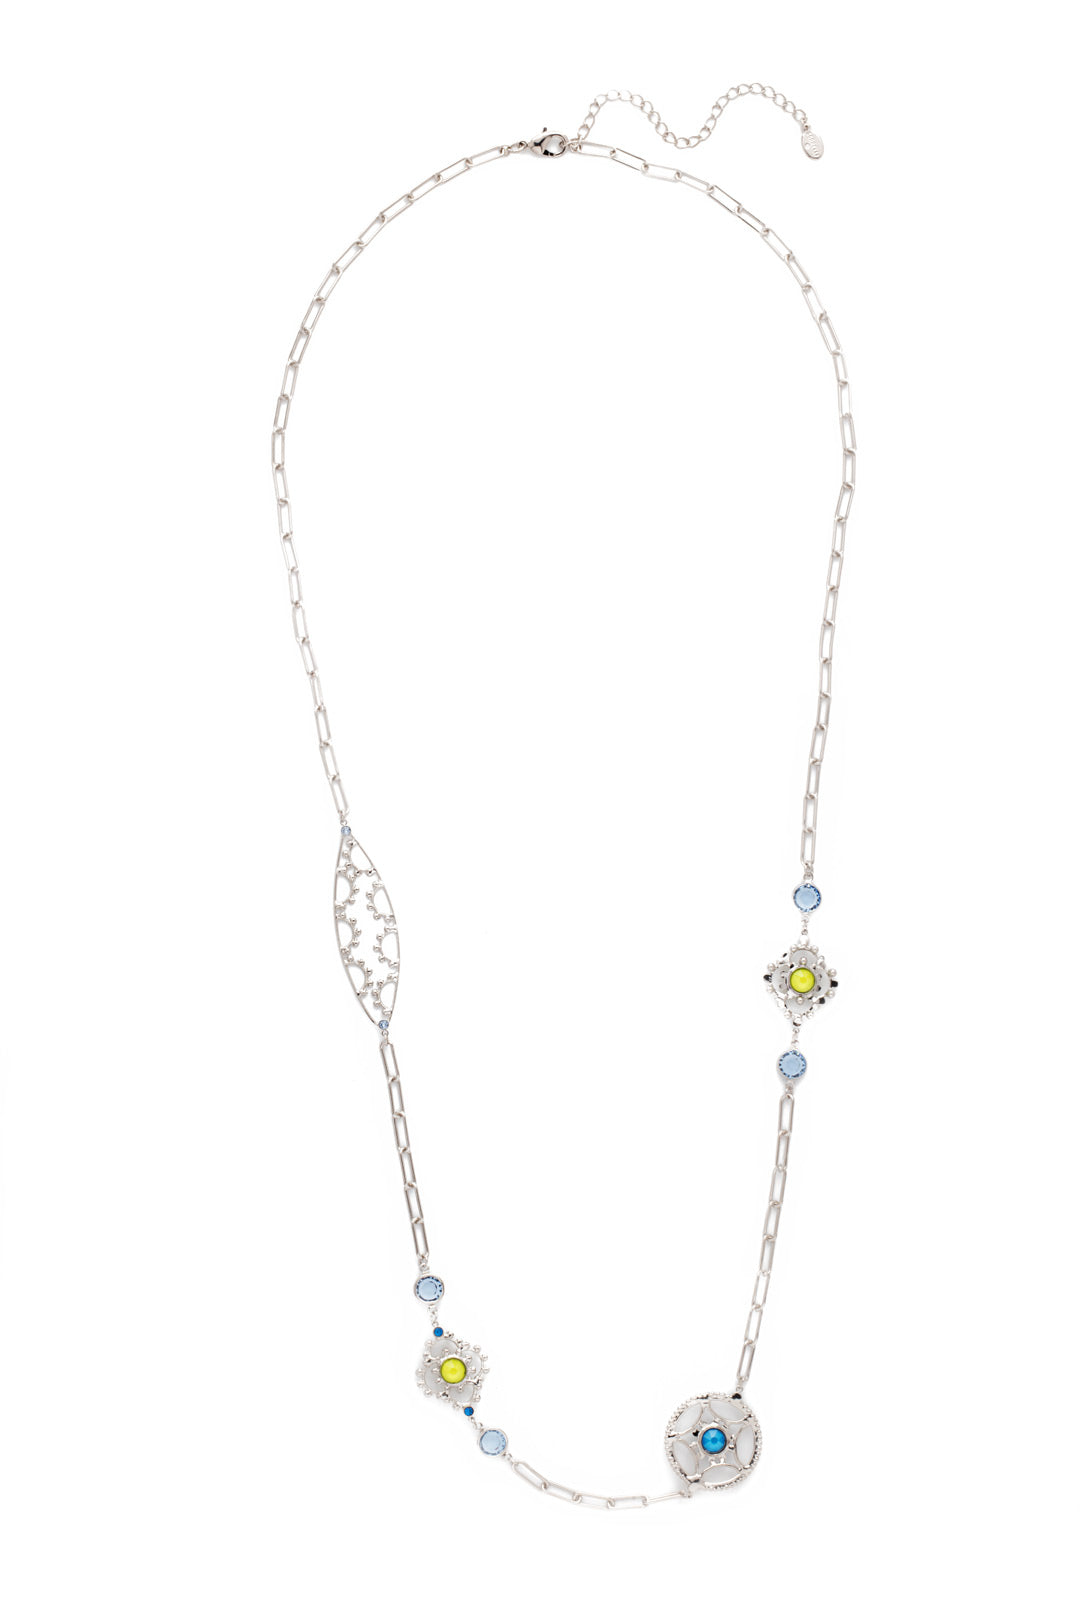 Everly Long Necklace - NES6PDBPY - <p>The Everly Long Necklace is a great layering piece that's unlike any other in your jewelry collection with its unique hand-soldered metalwork and clear, sparkling gems. From Sorrelli's Blue Poppy collection in our Palladium finish.</p>